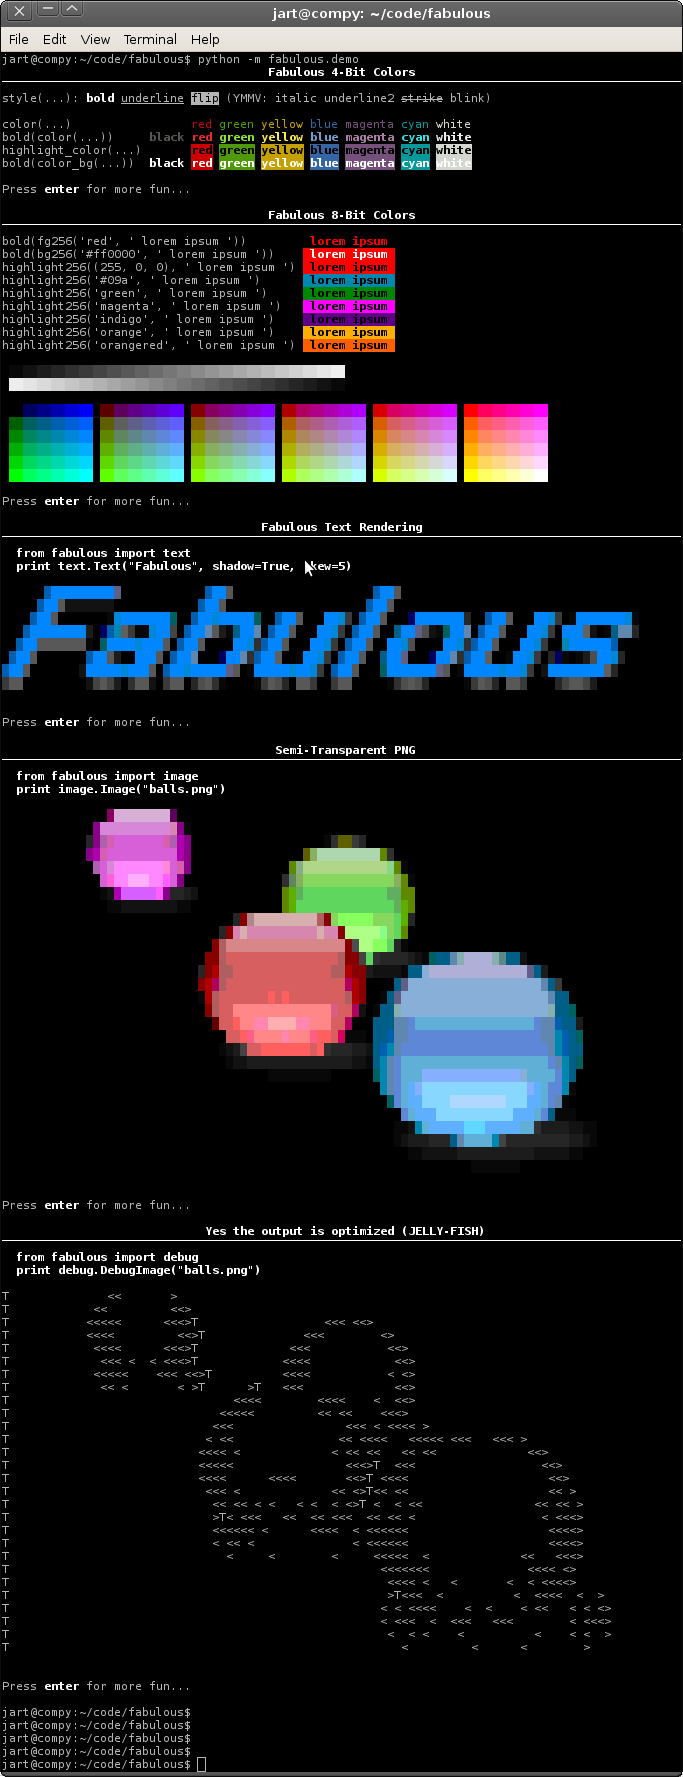 _images/fabulous-demo.png